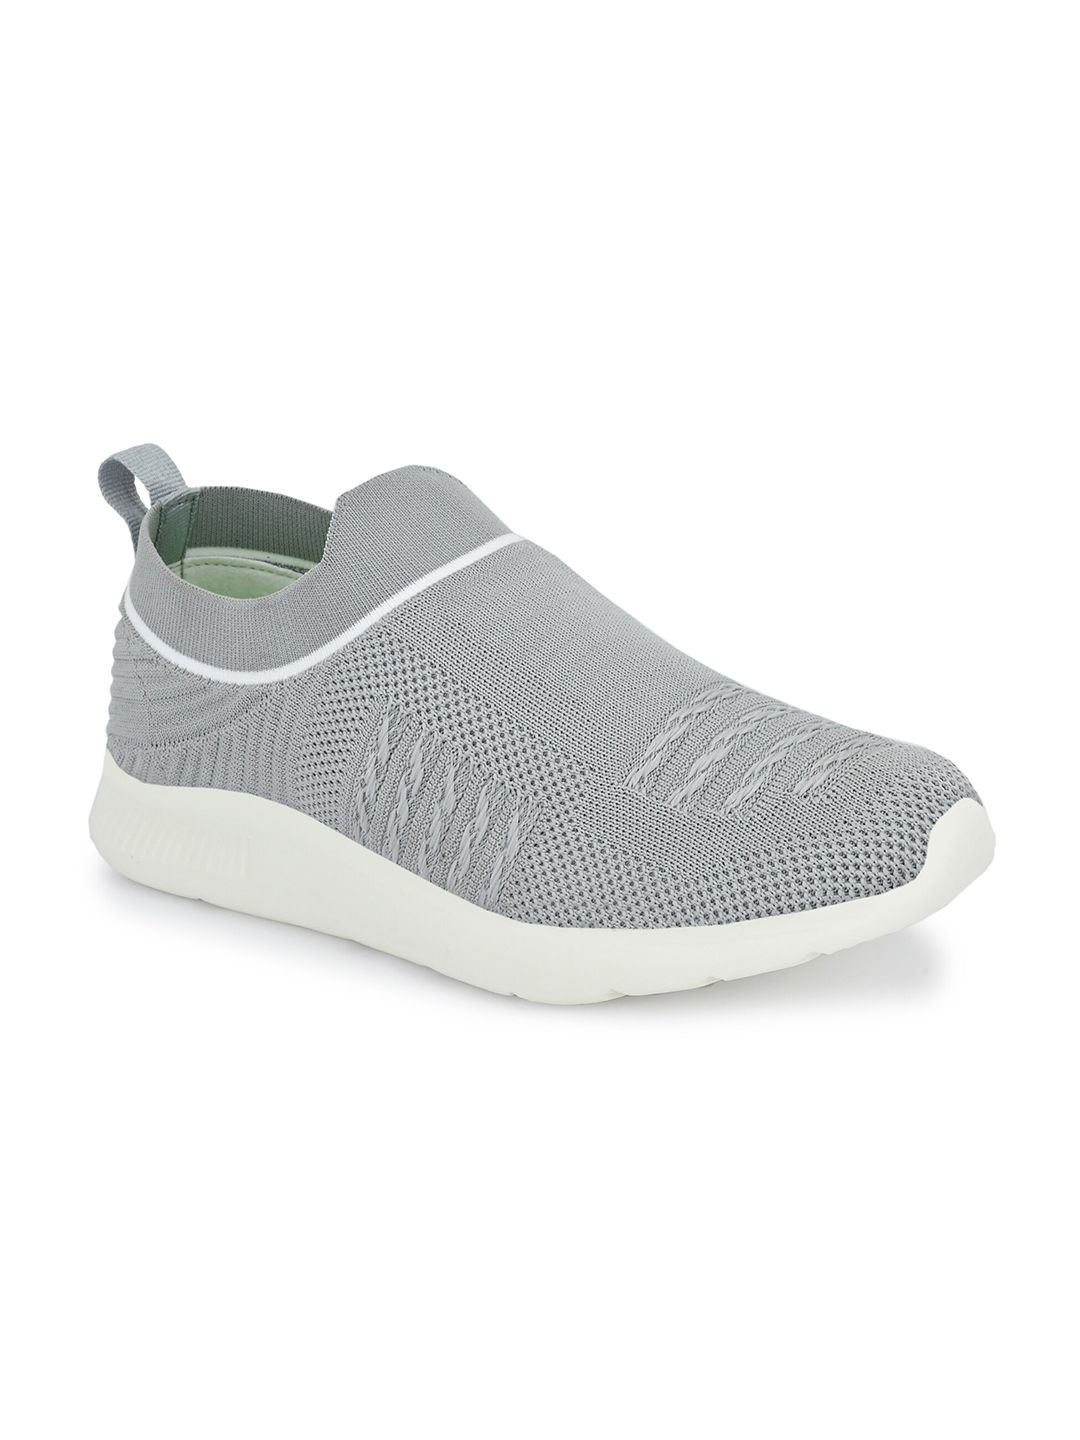 OFF LIMITS Women Grey Mesh Walking Non-Marking Shoes Price in India